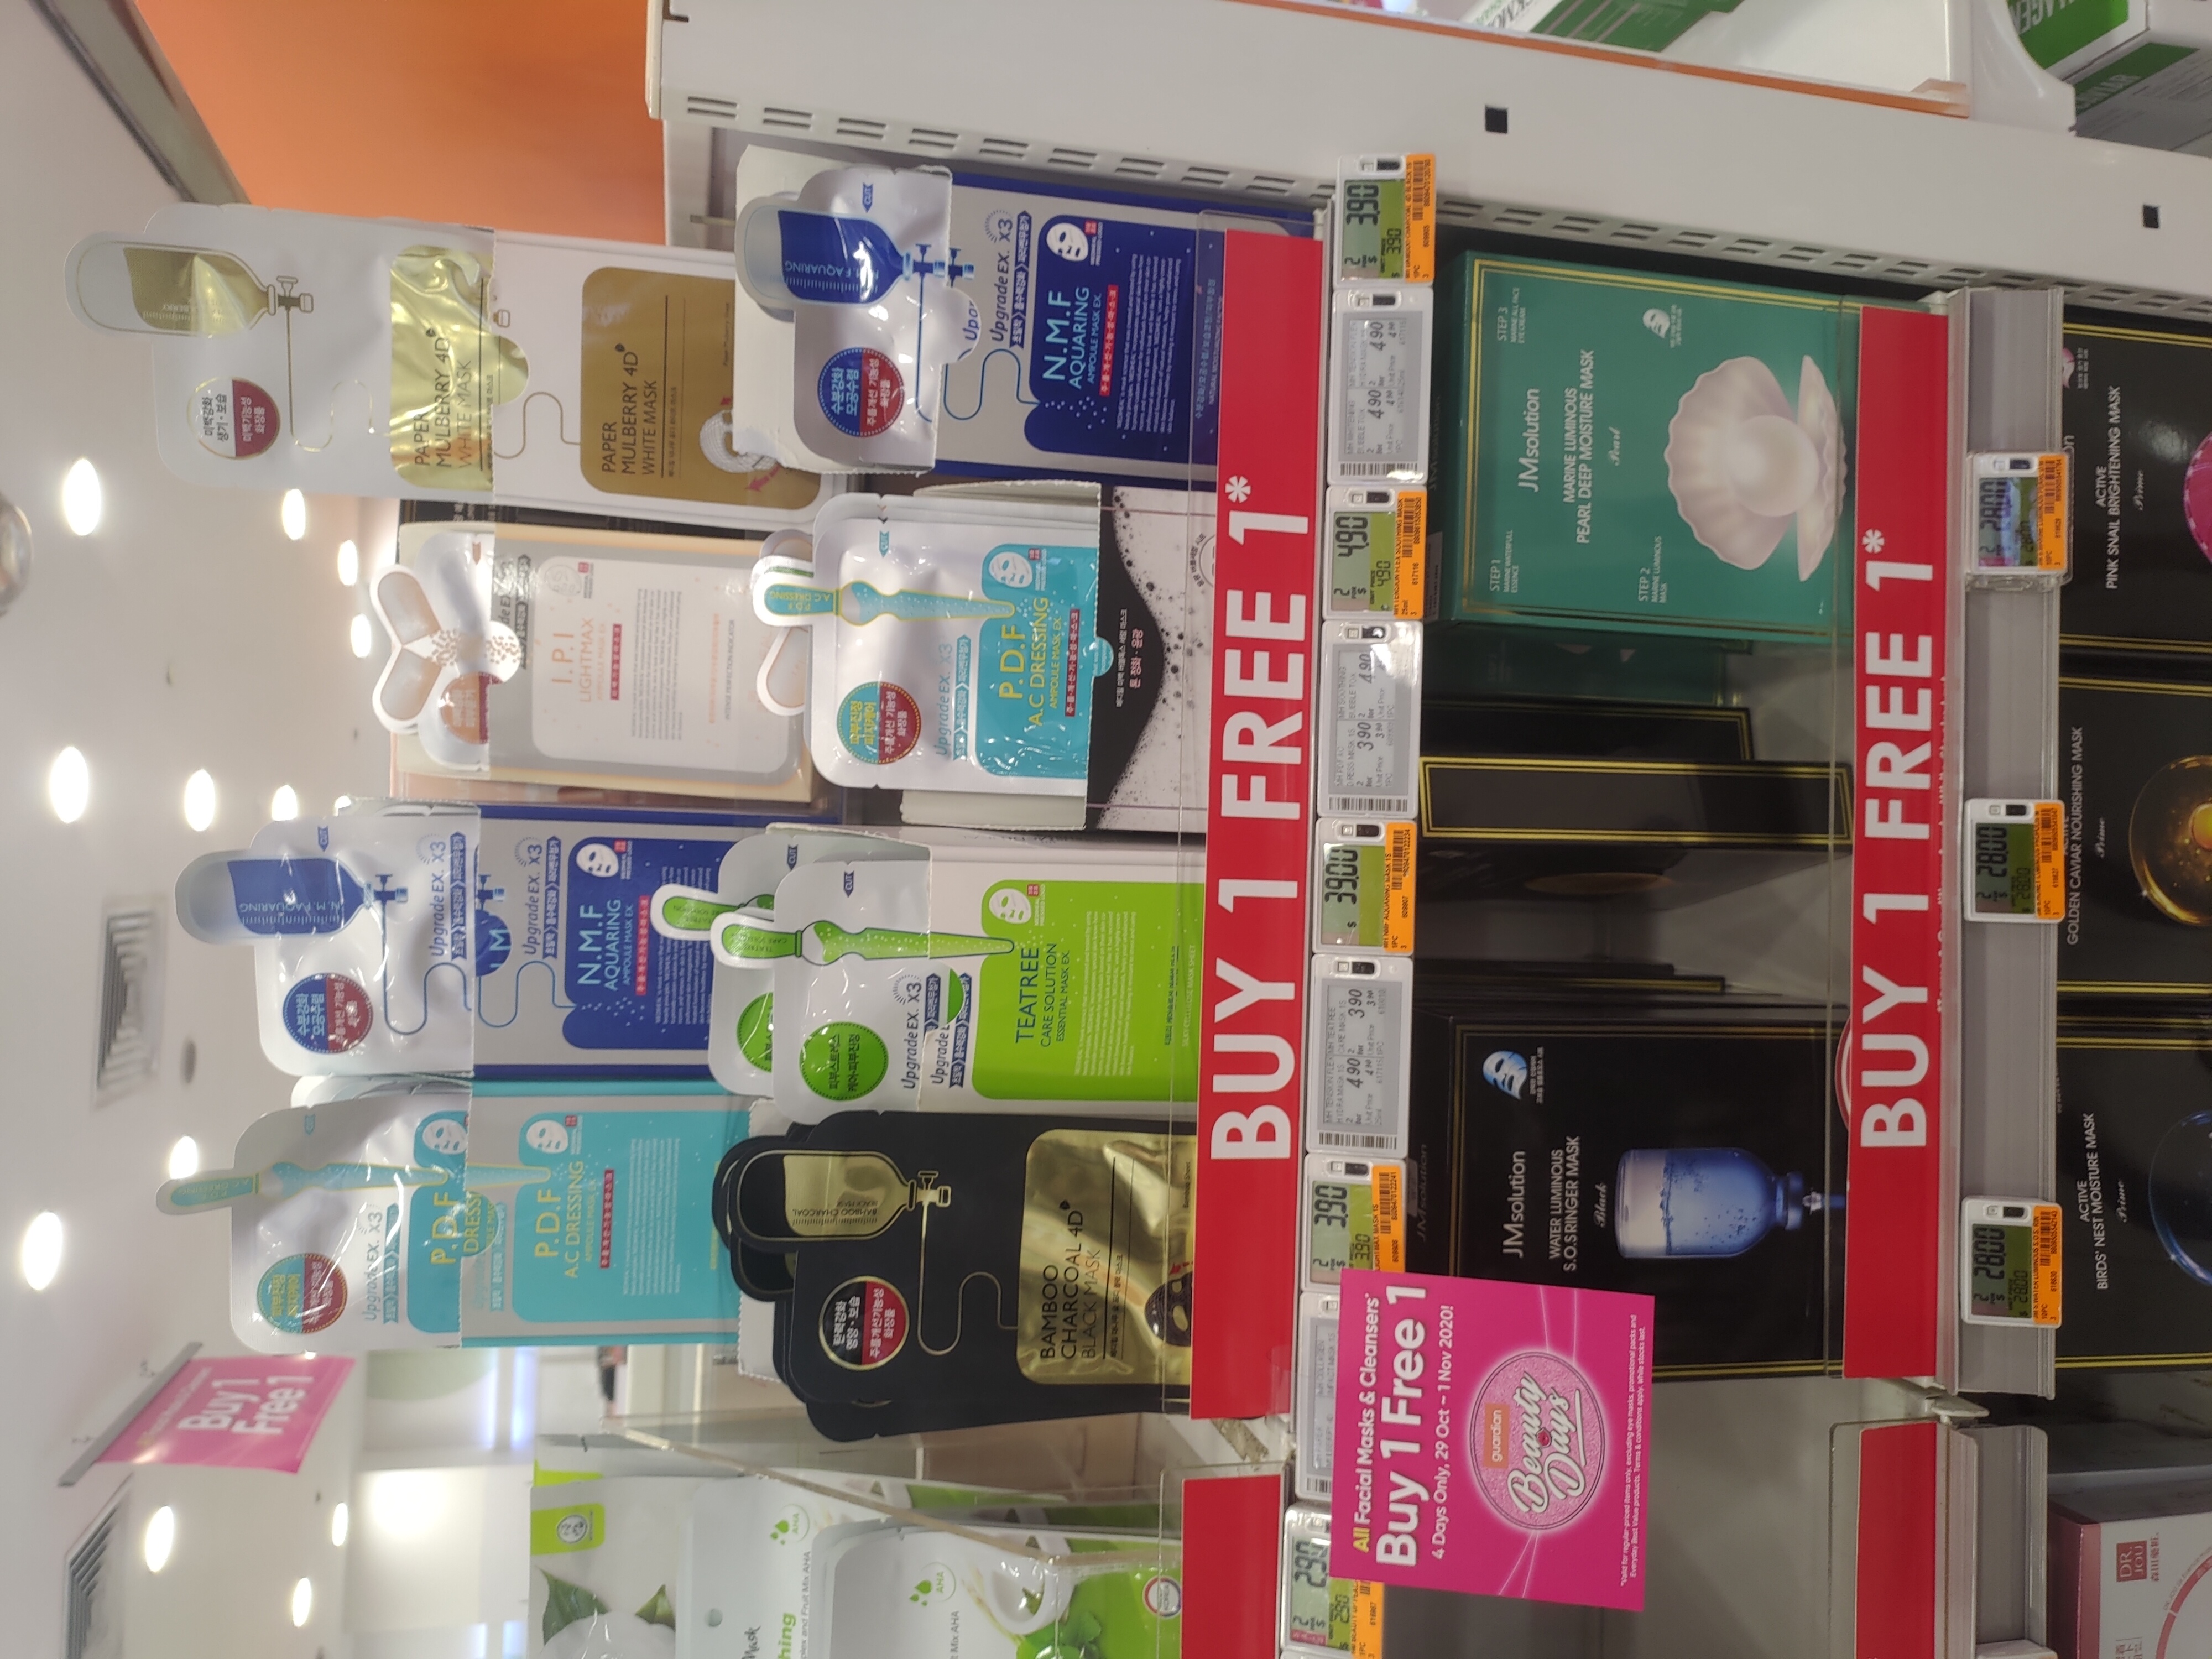 Guardian offering BUY 1 GET 1 FREE on all facial masks and cleansers from now till 1 Nov 20 - 3